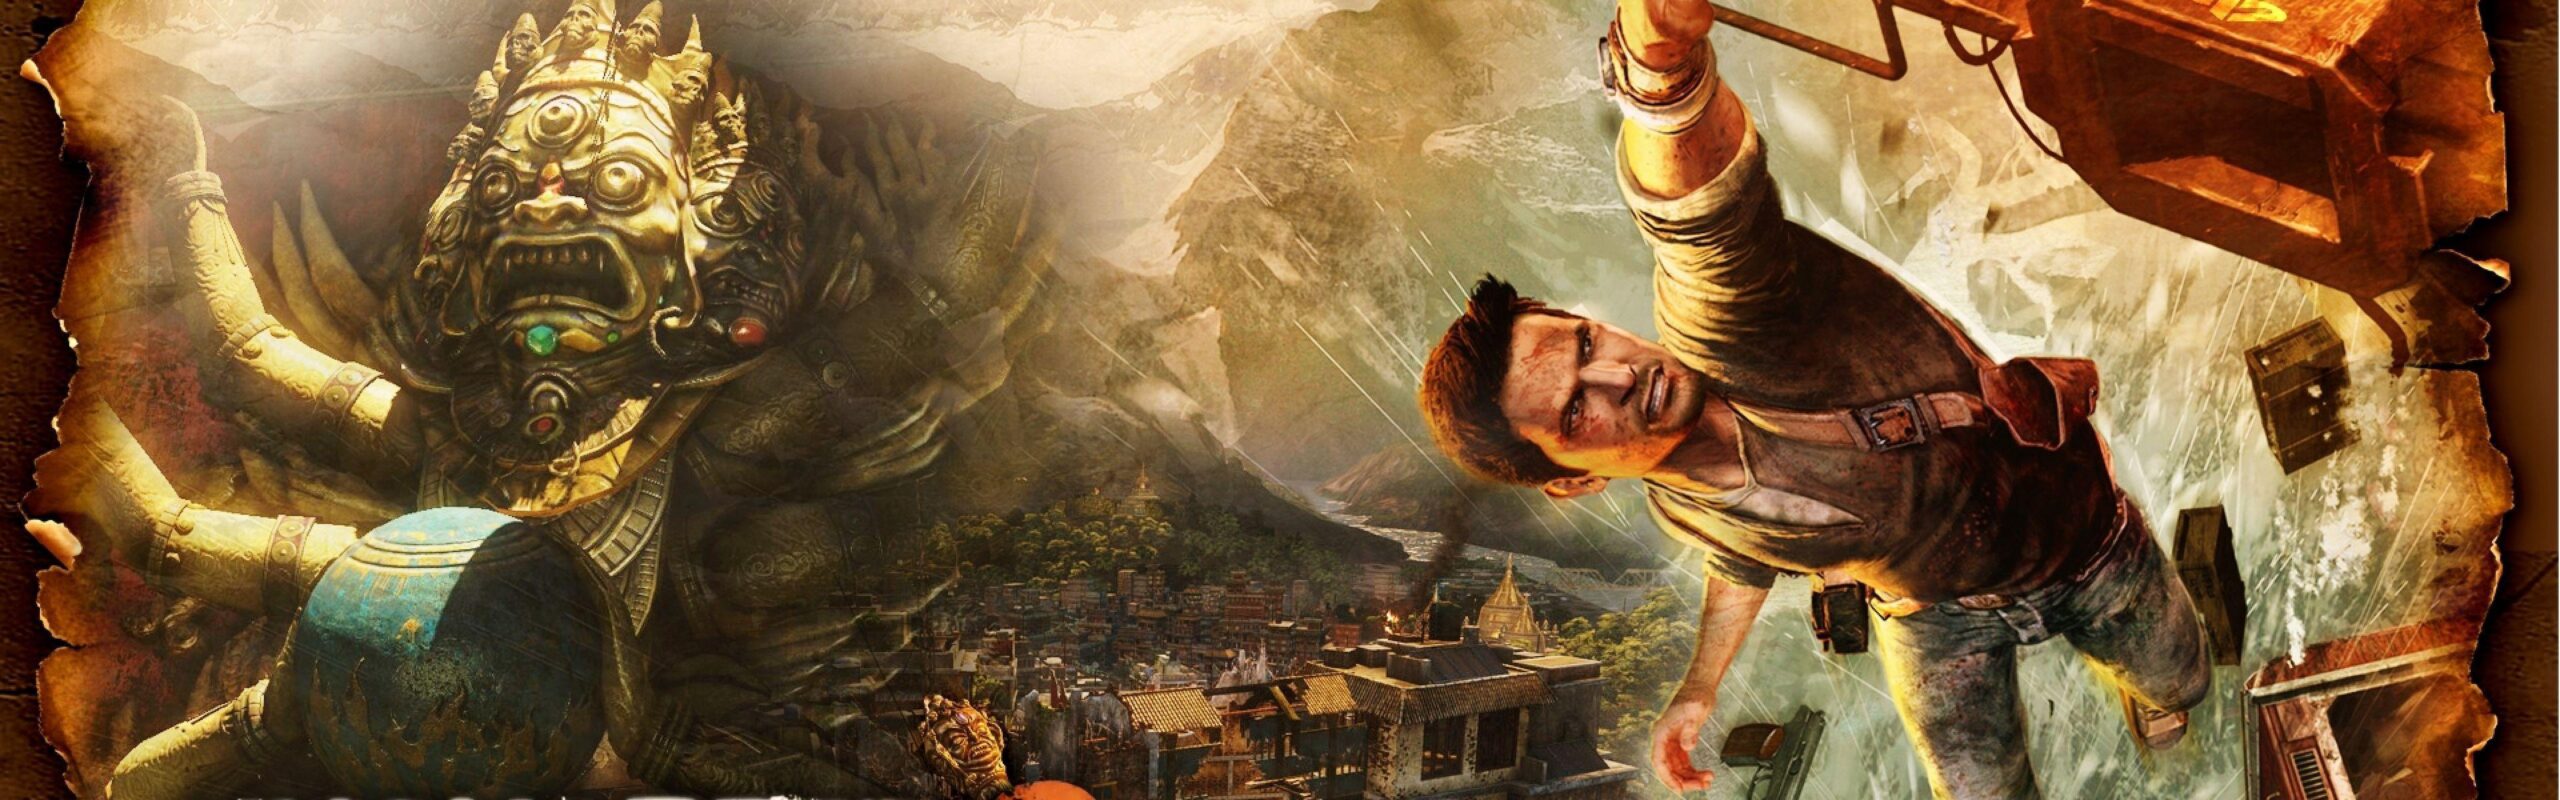 Uncharted 2 Among Thieves cool wallpaper, Uncharted 2 Among Thieves, Game